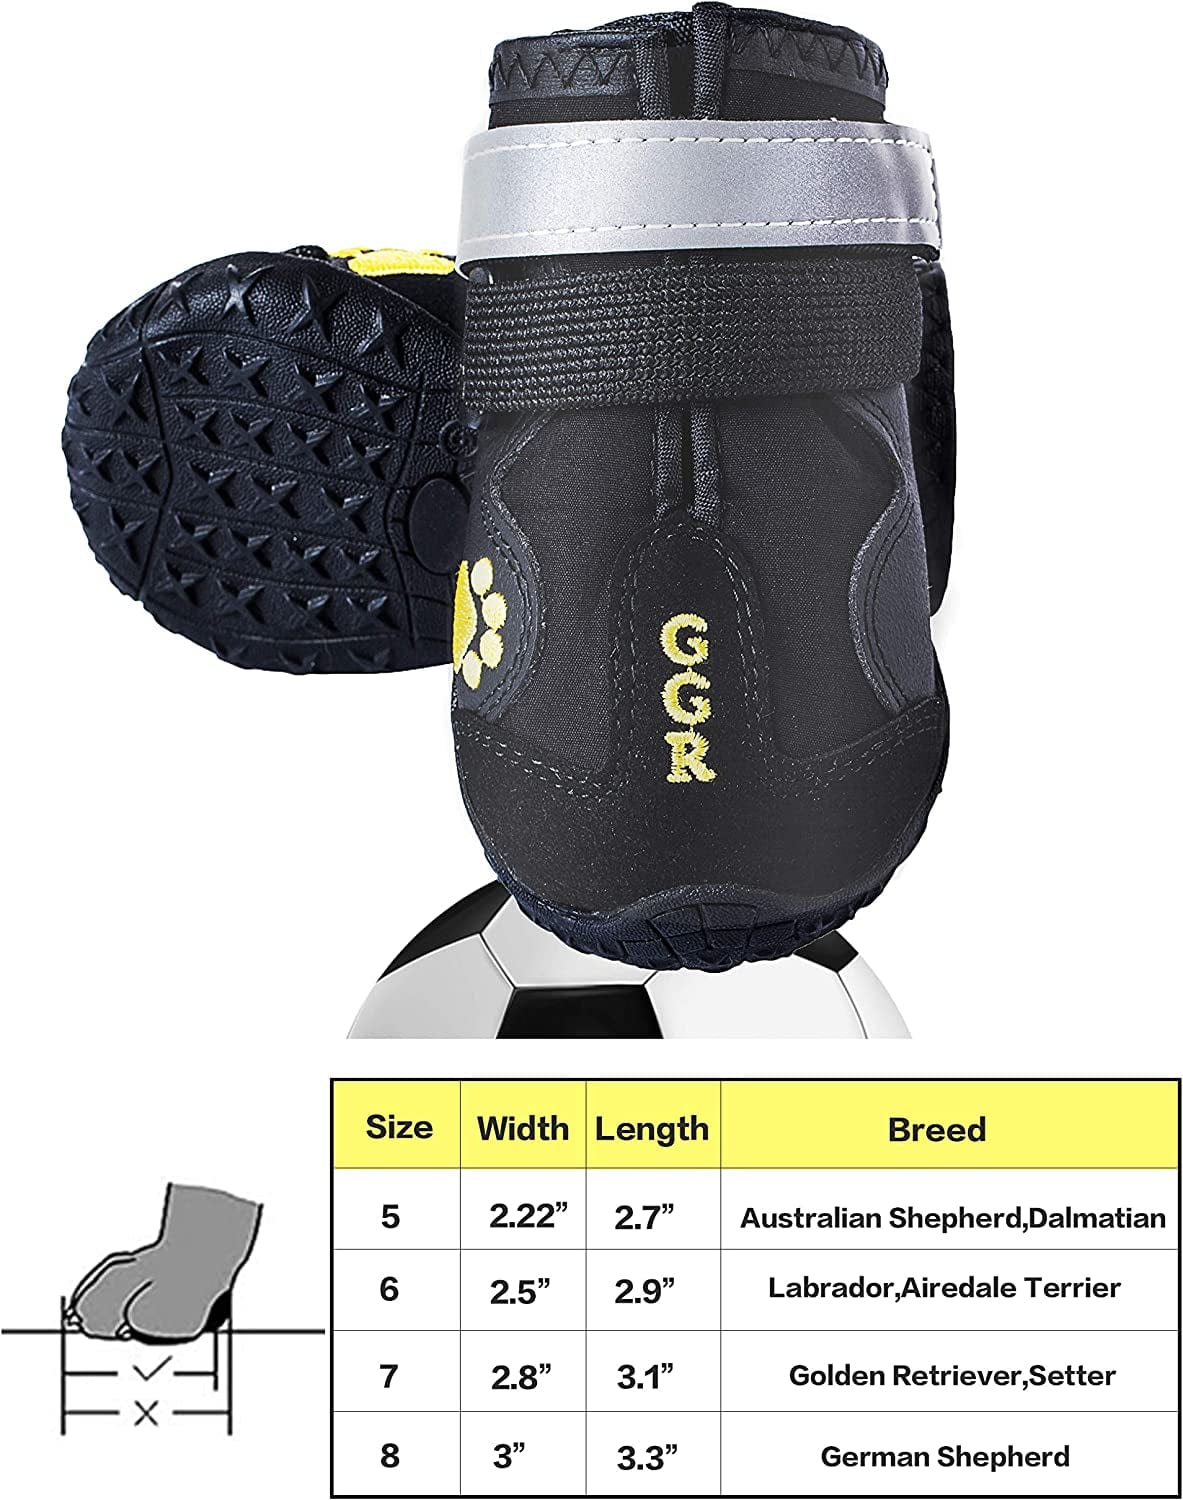 GGR Pet Boots for Hot Pavement Boots Outdoor Breathable and Wearproof Running Shoes for Summer Dogs Pet Boots